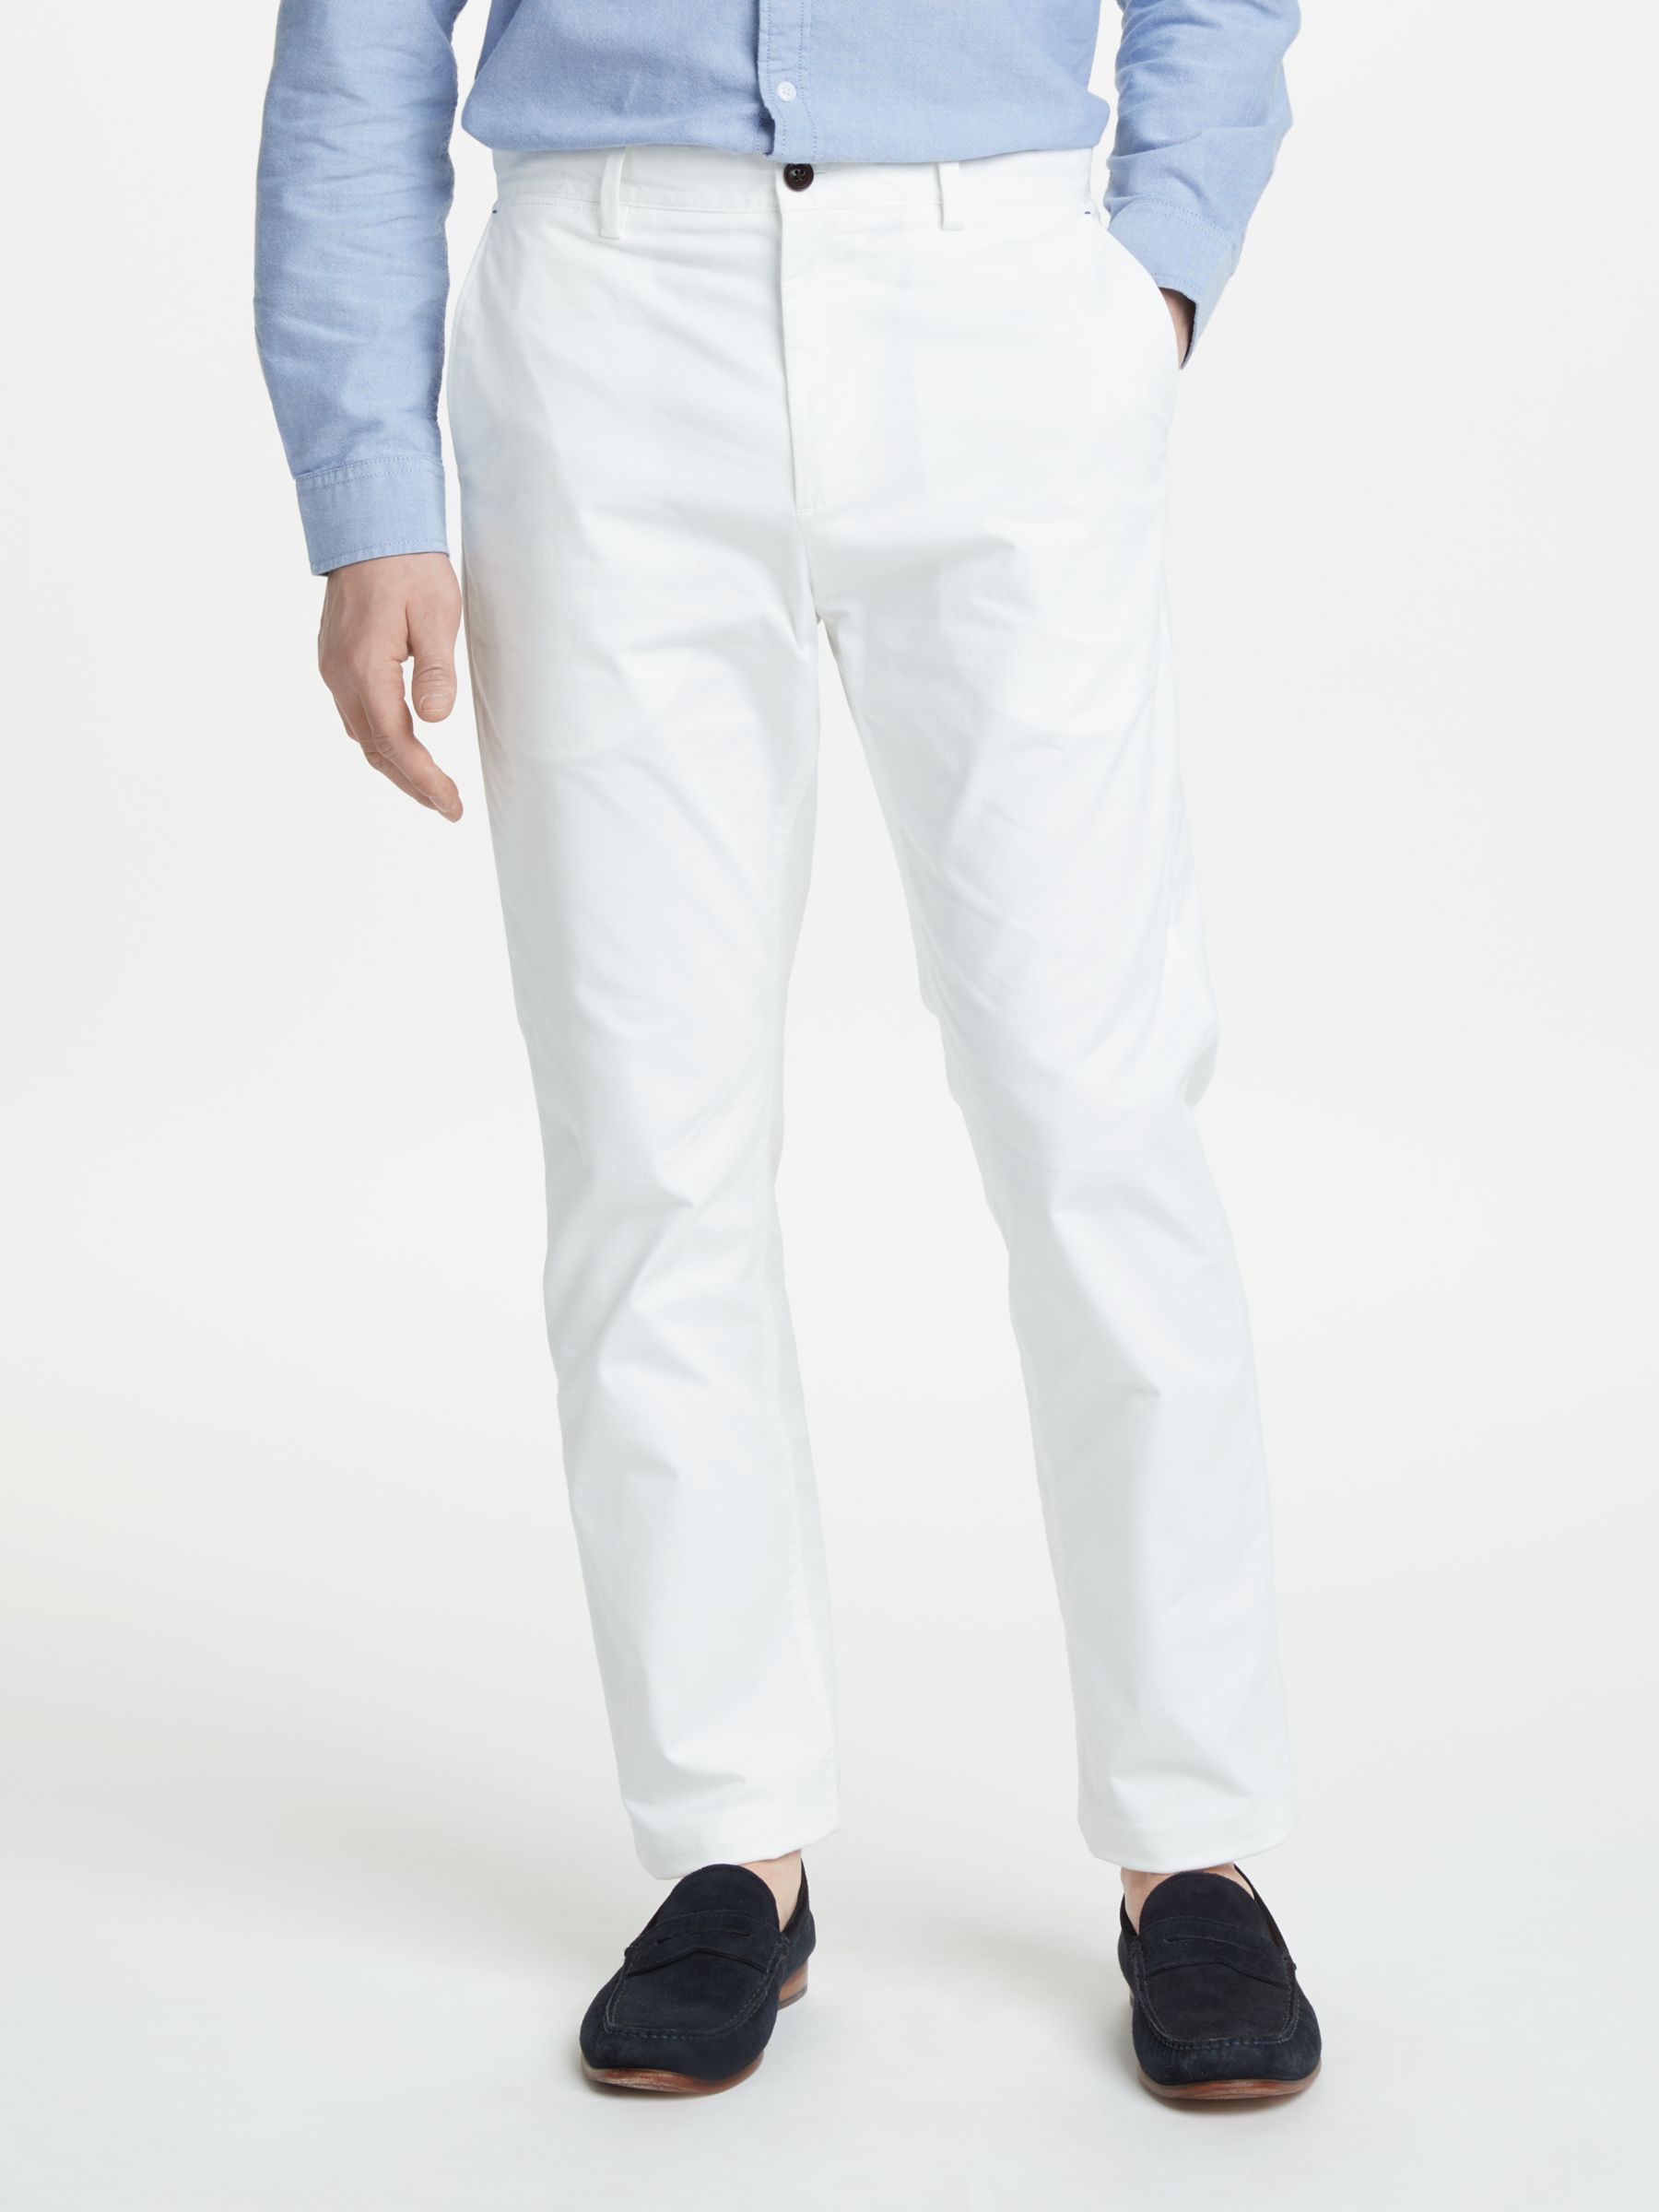 John Lewis & Partners Essential Chinos, White, 38S